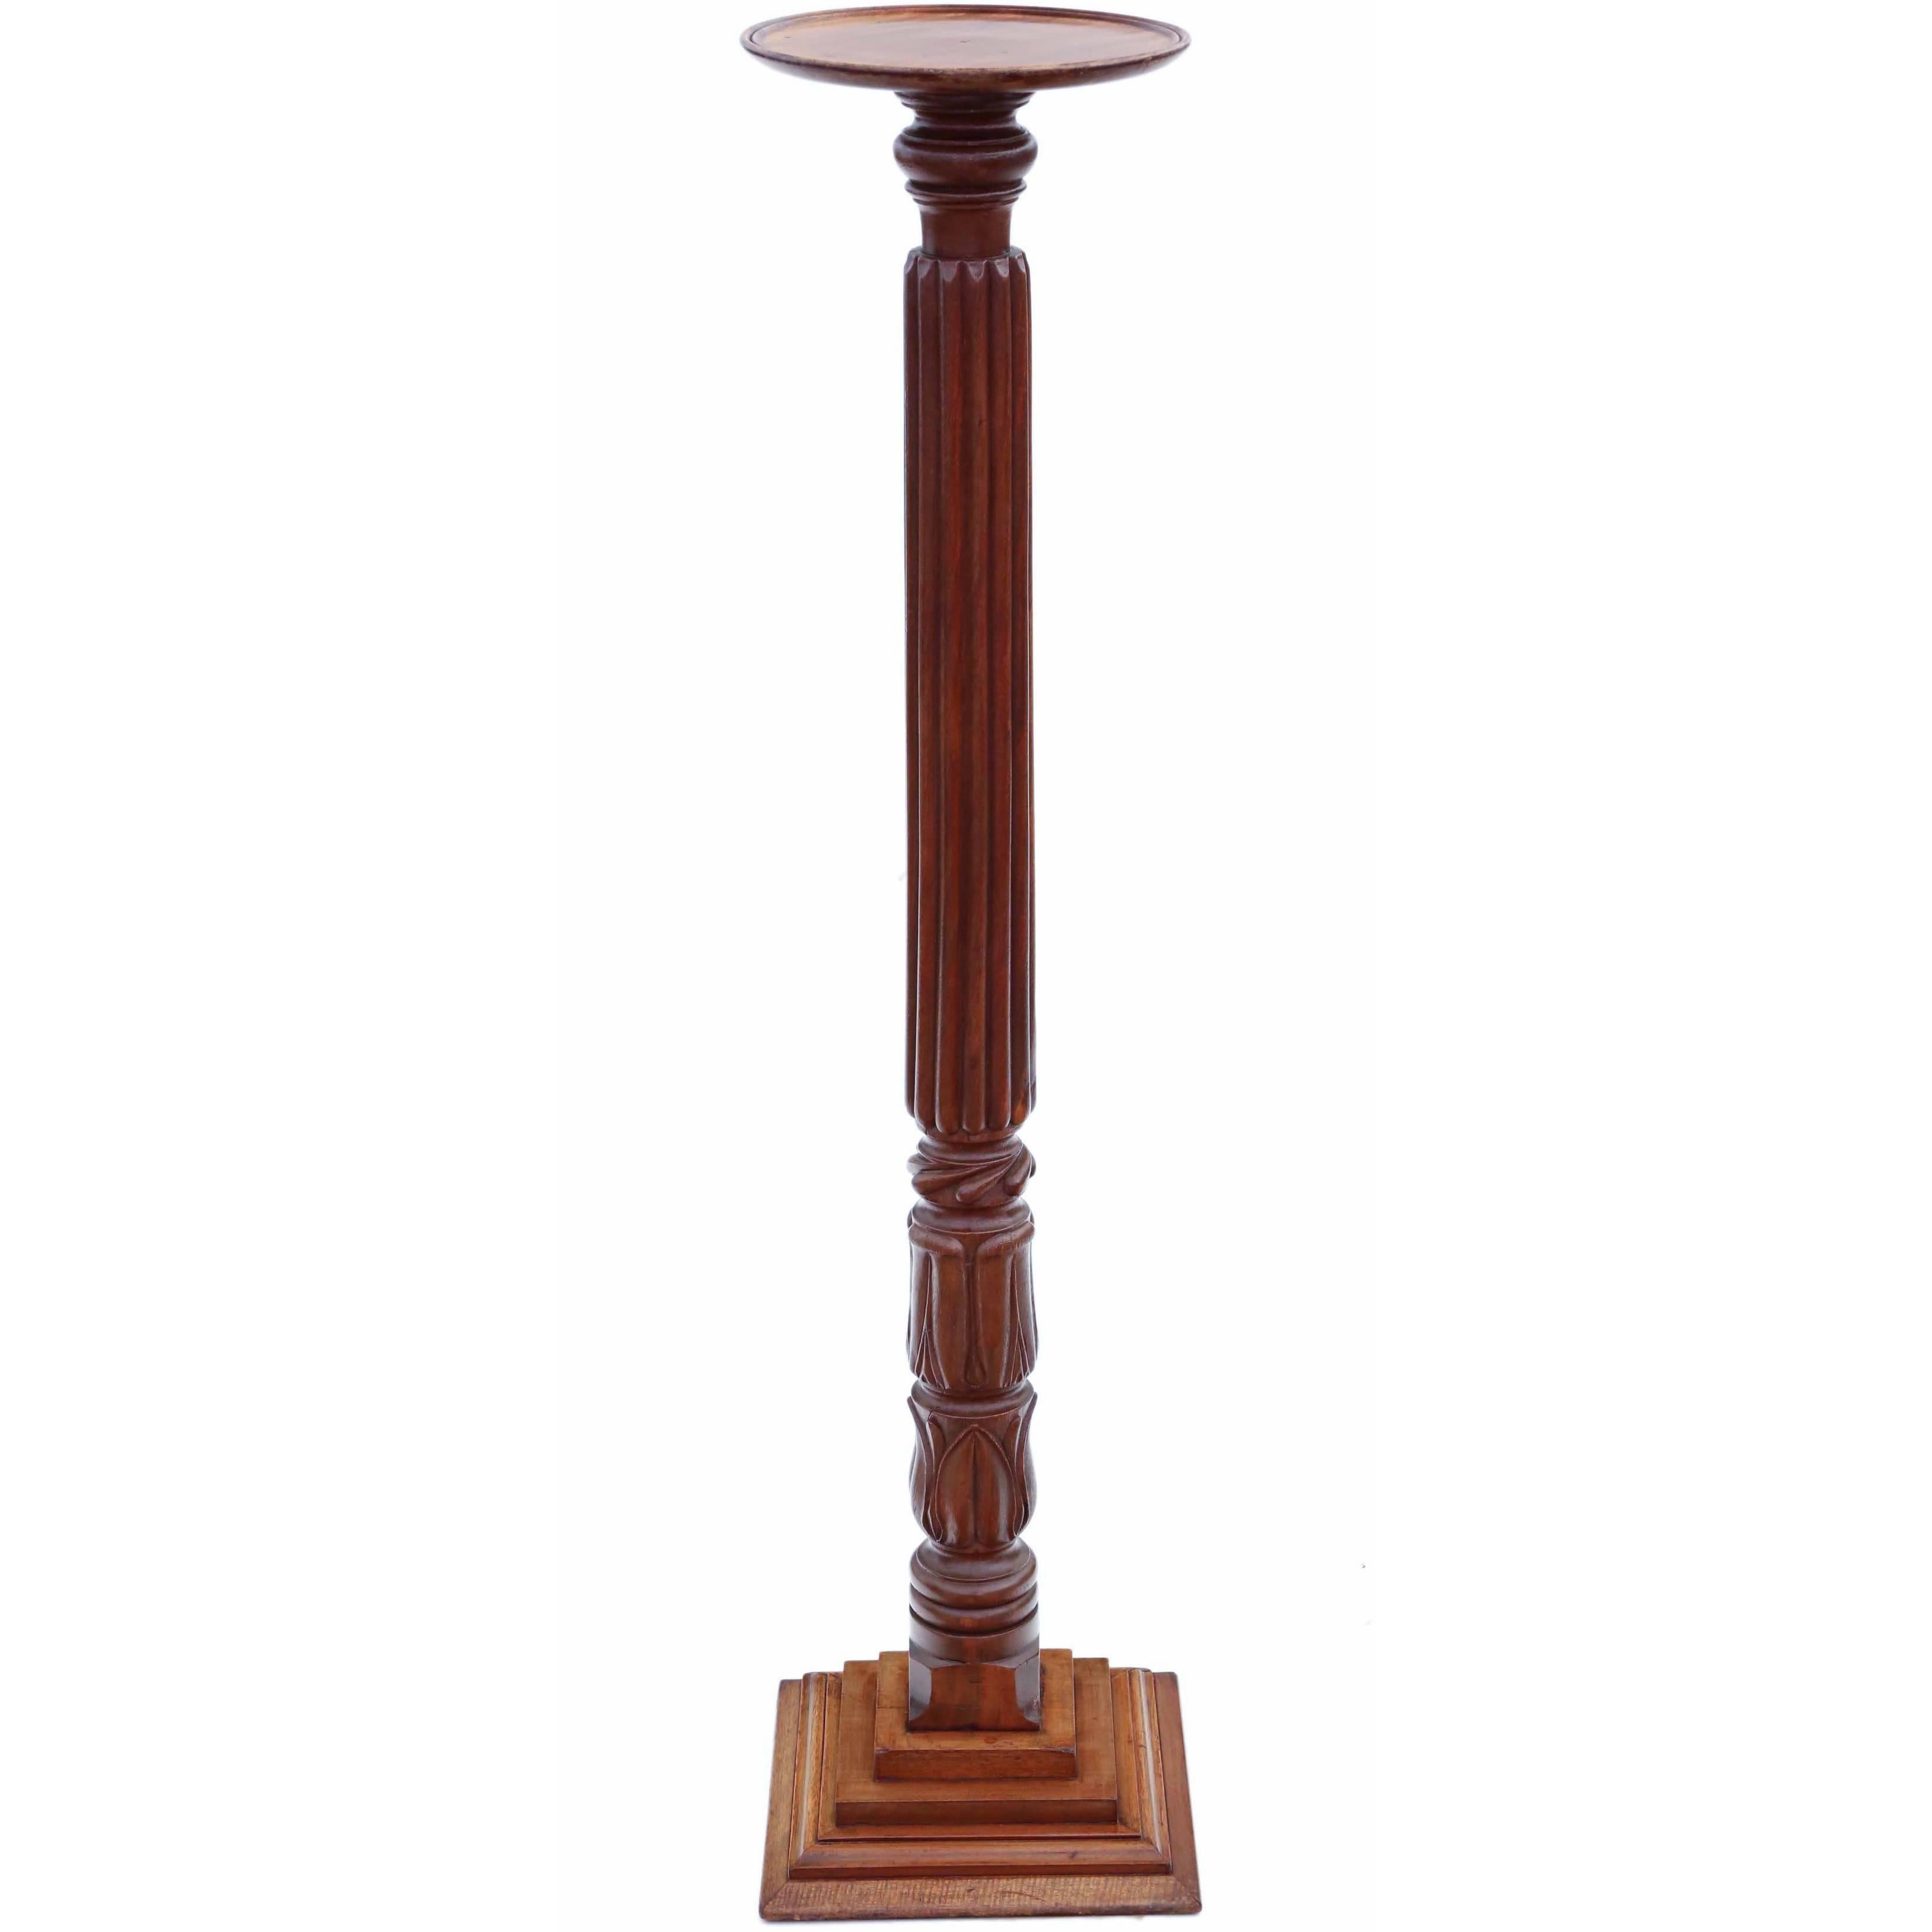 Antique Victorian Mahogany Torchiere Jardiniere Stand Pedestal Plant Table For Sale